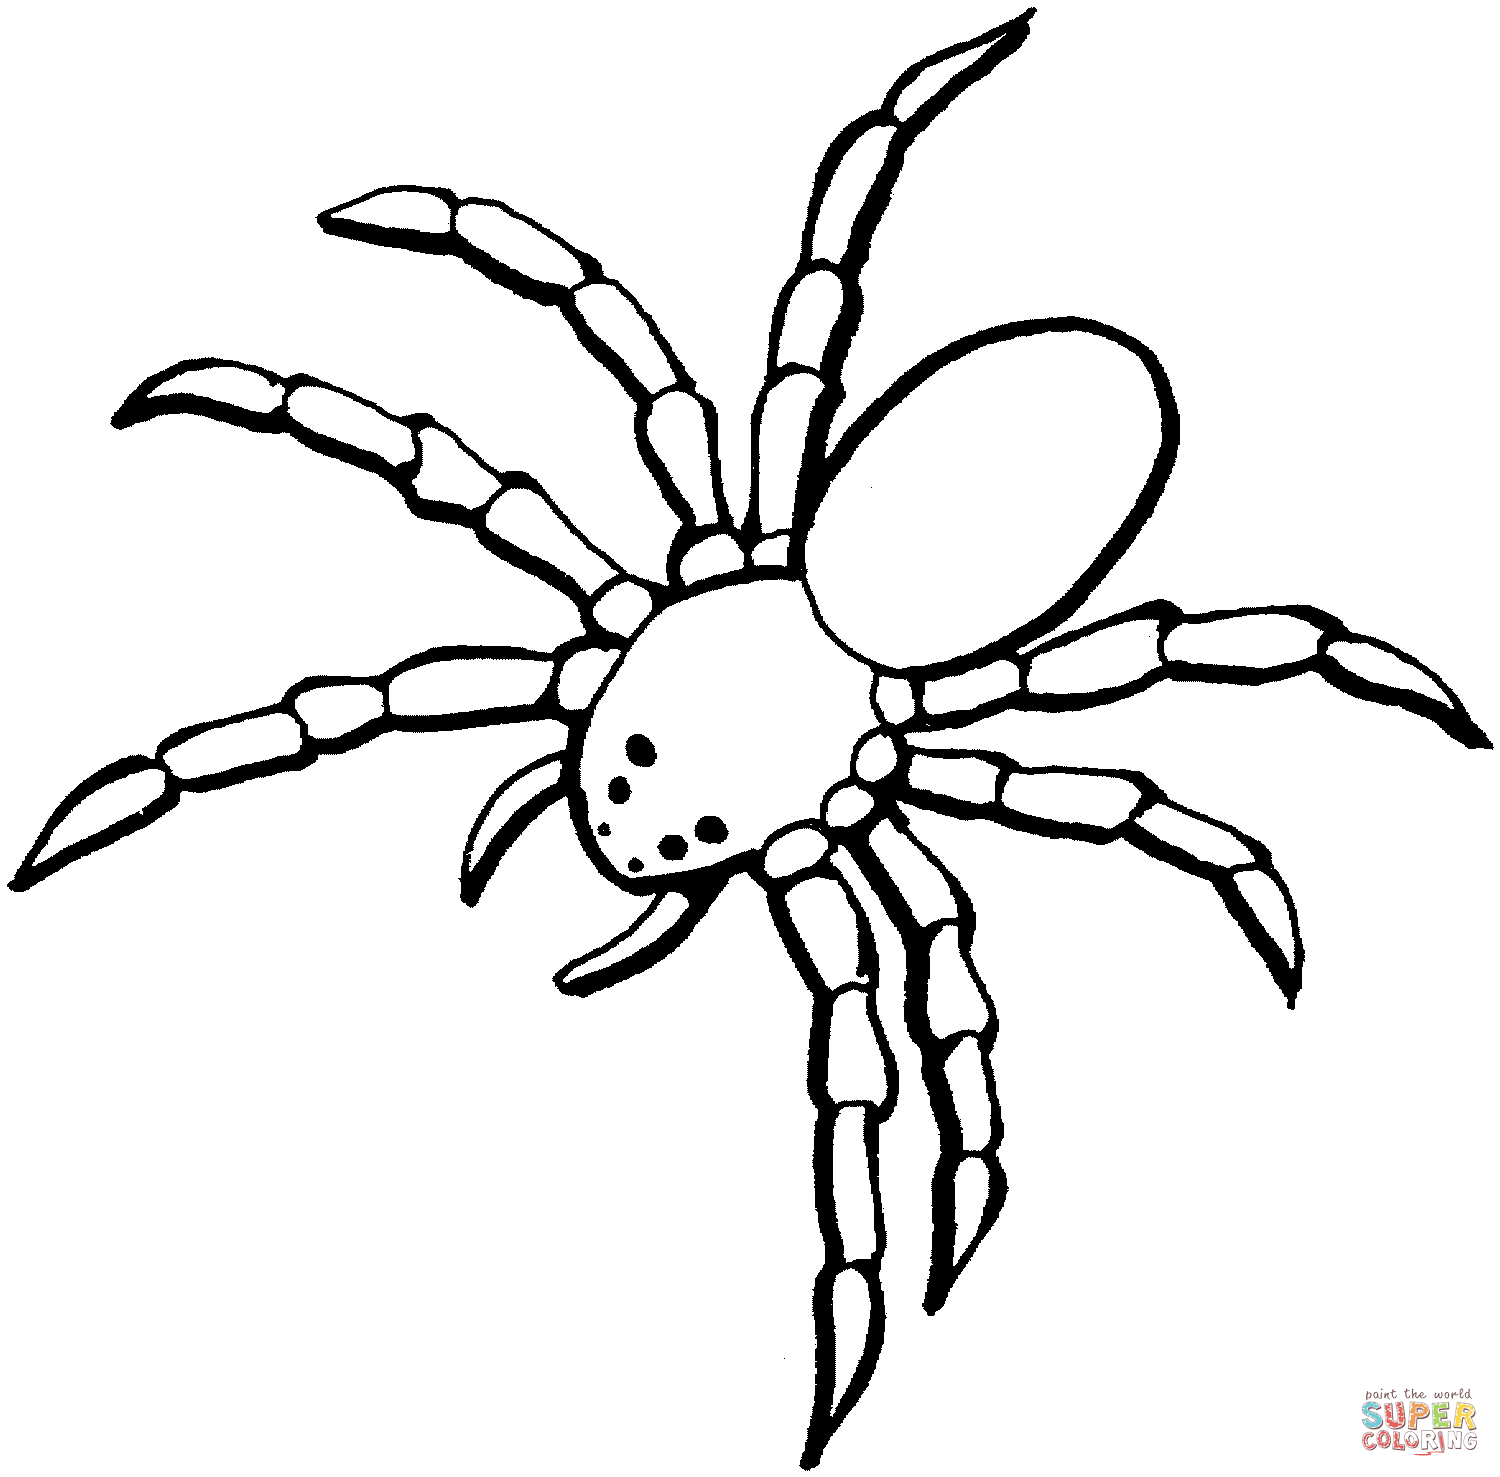 Spider coloring #16, Download drawings